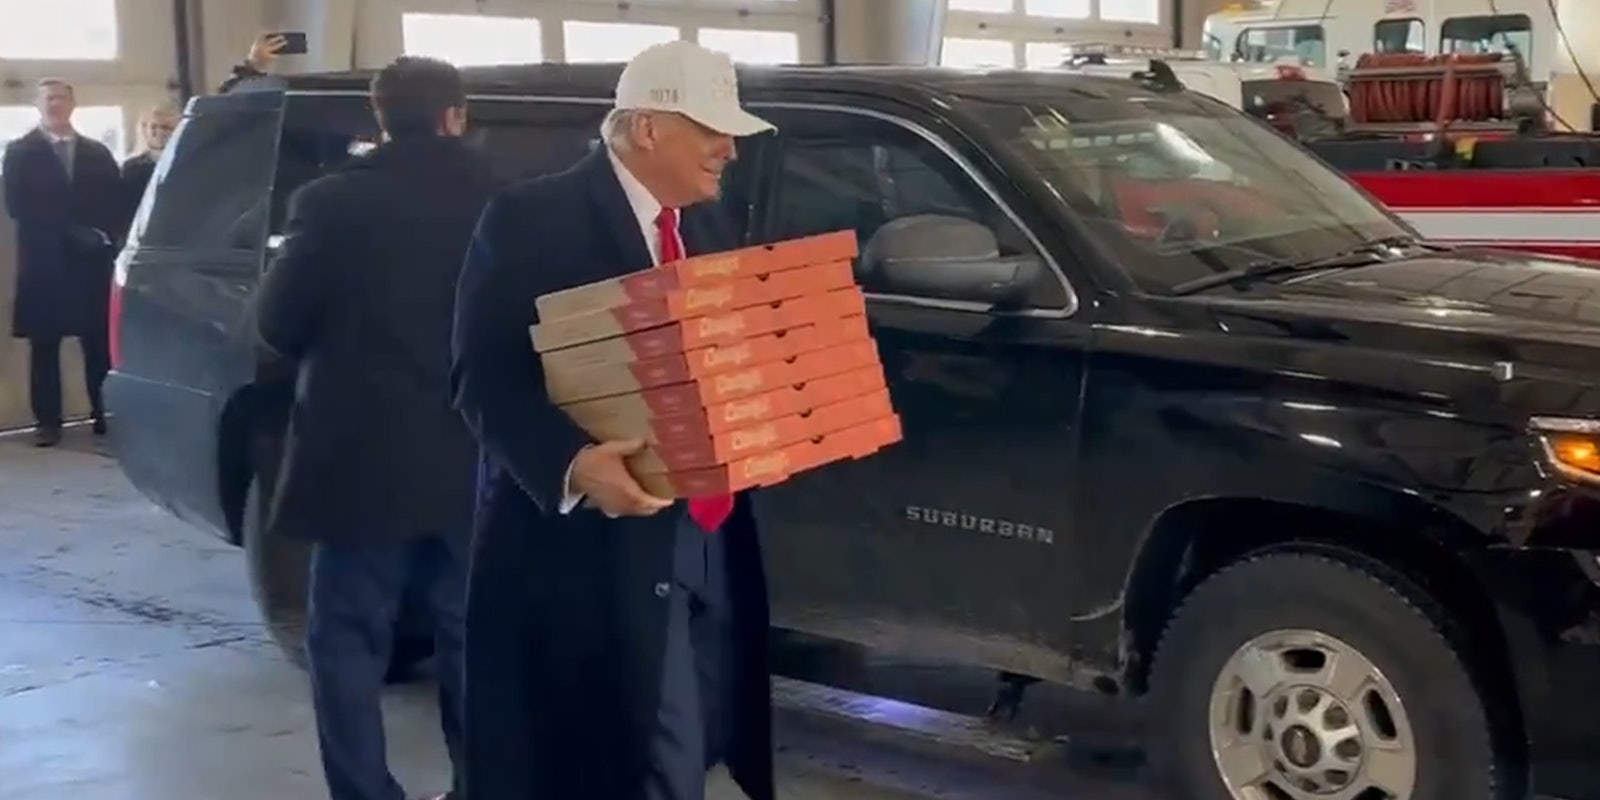 Trump carrying 8 pizza boxes has his fans gushing